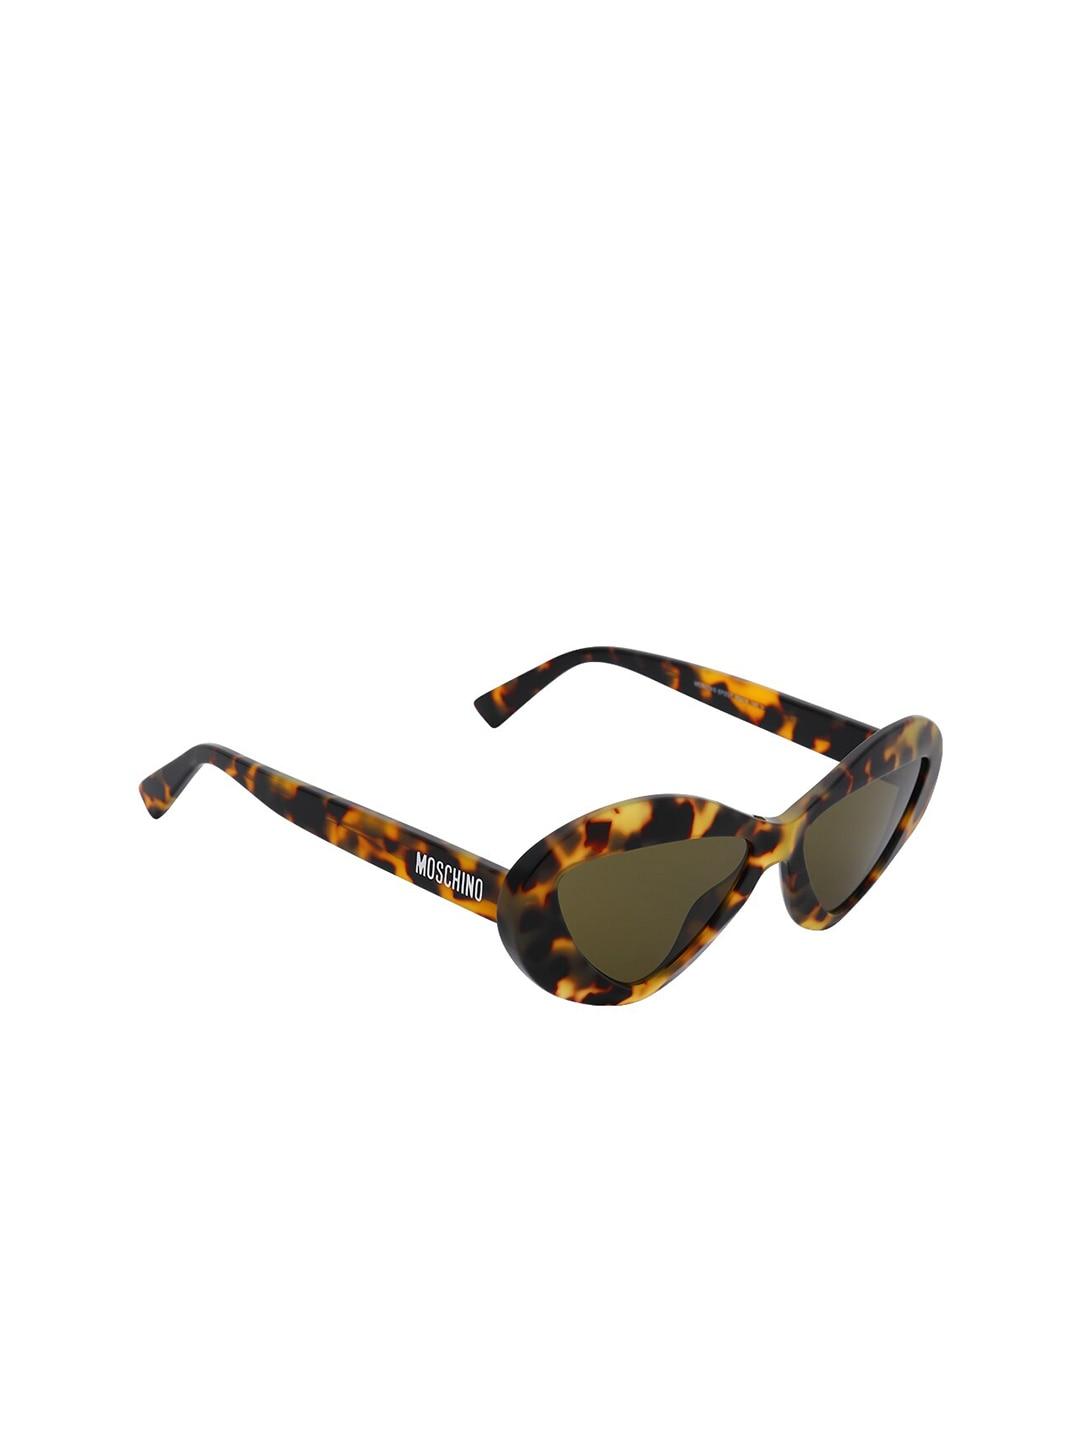 moschino-women-green-lens-&-yellow-cateye-sunglasses-with-uv-protected-lens